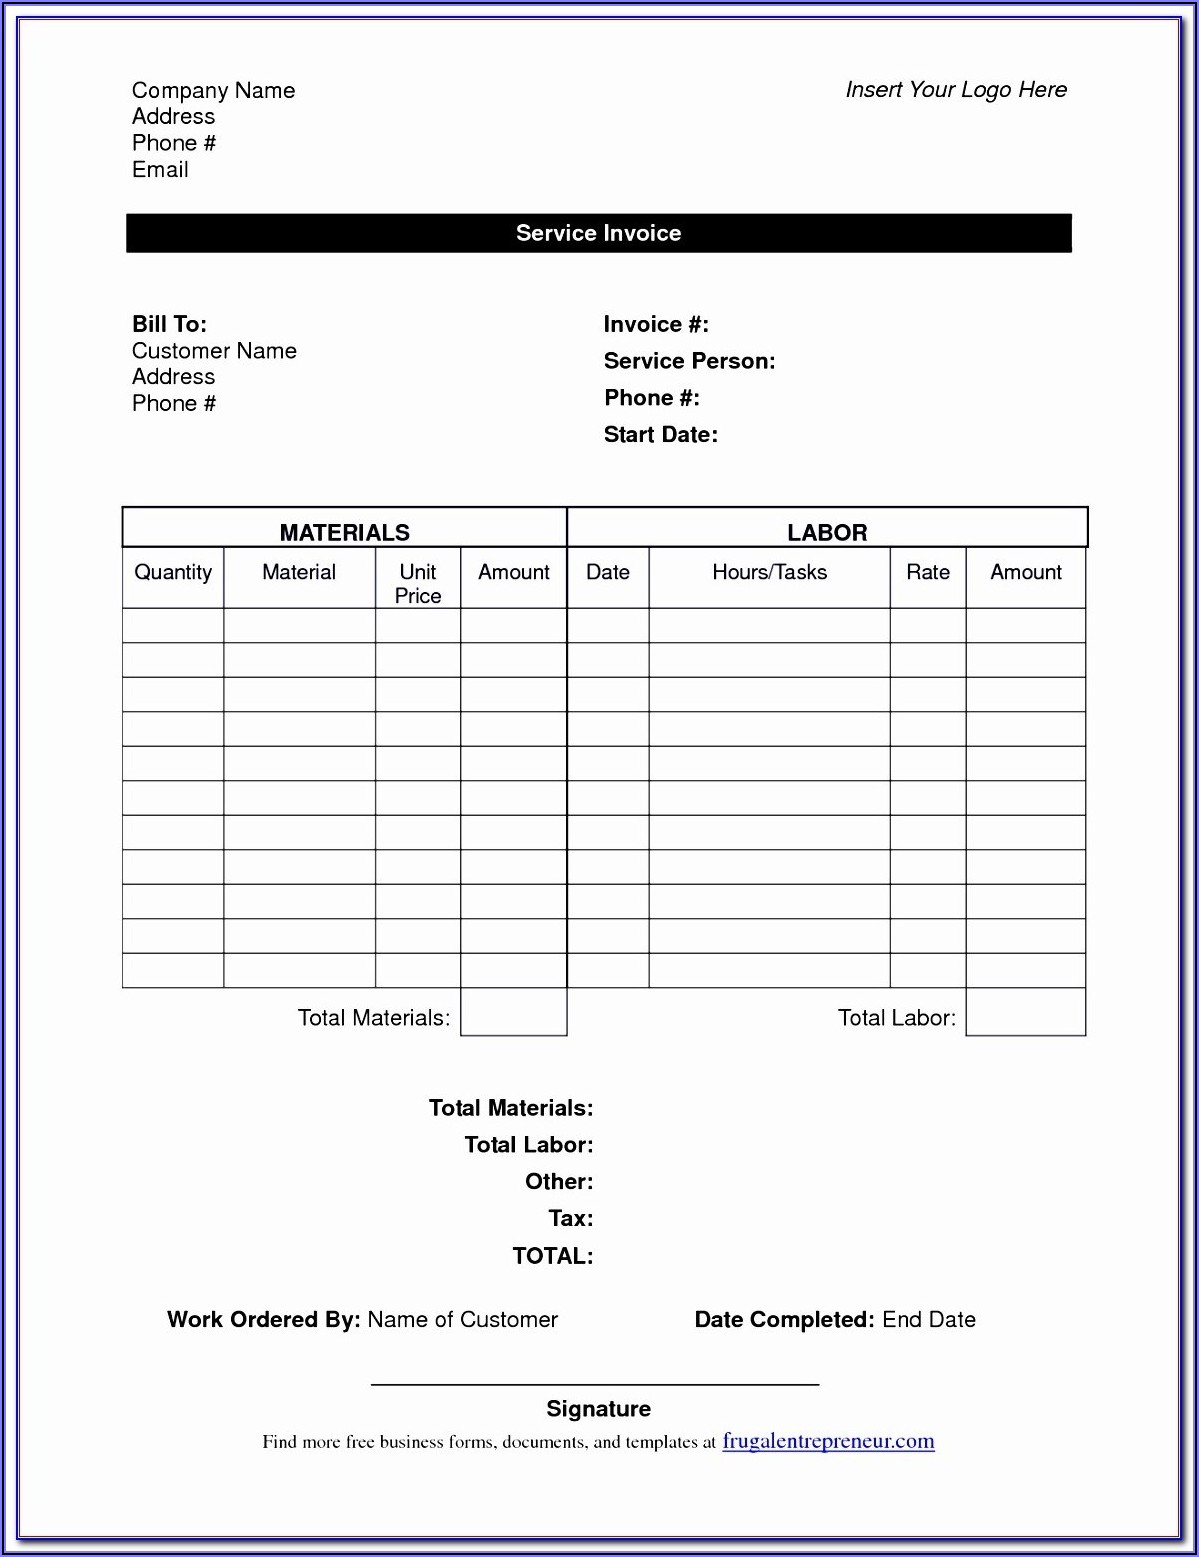 Deposition Invoice Template